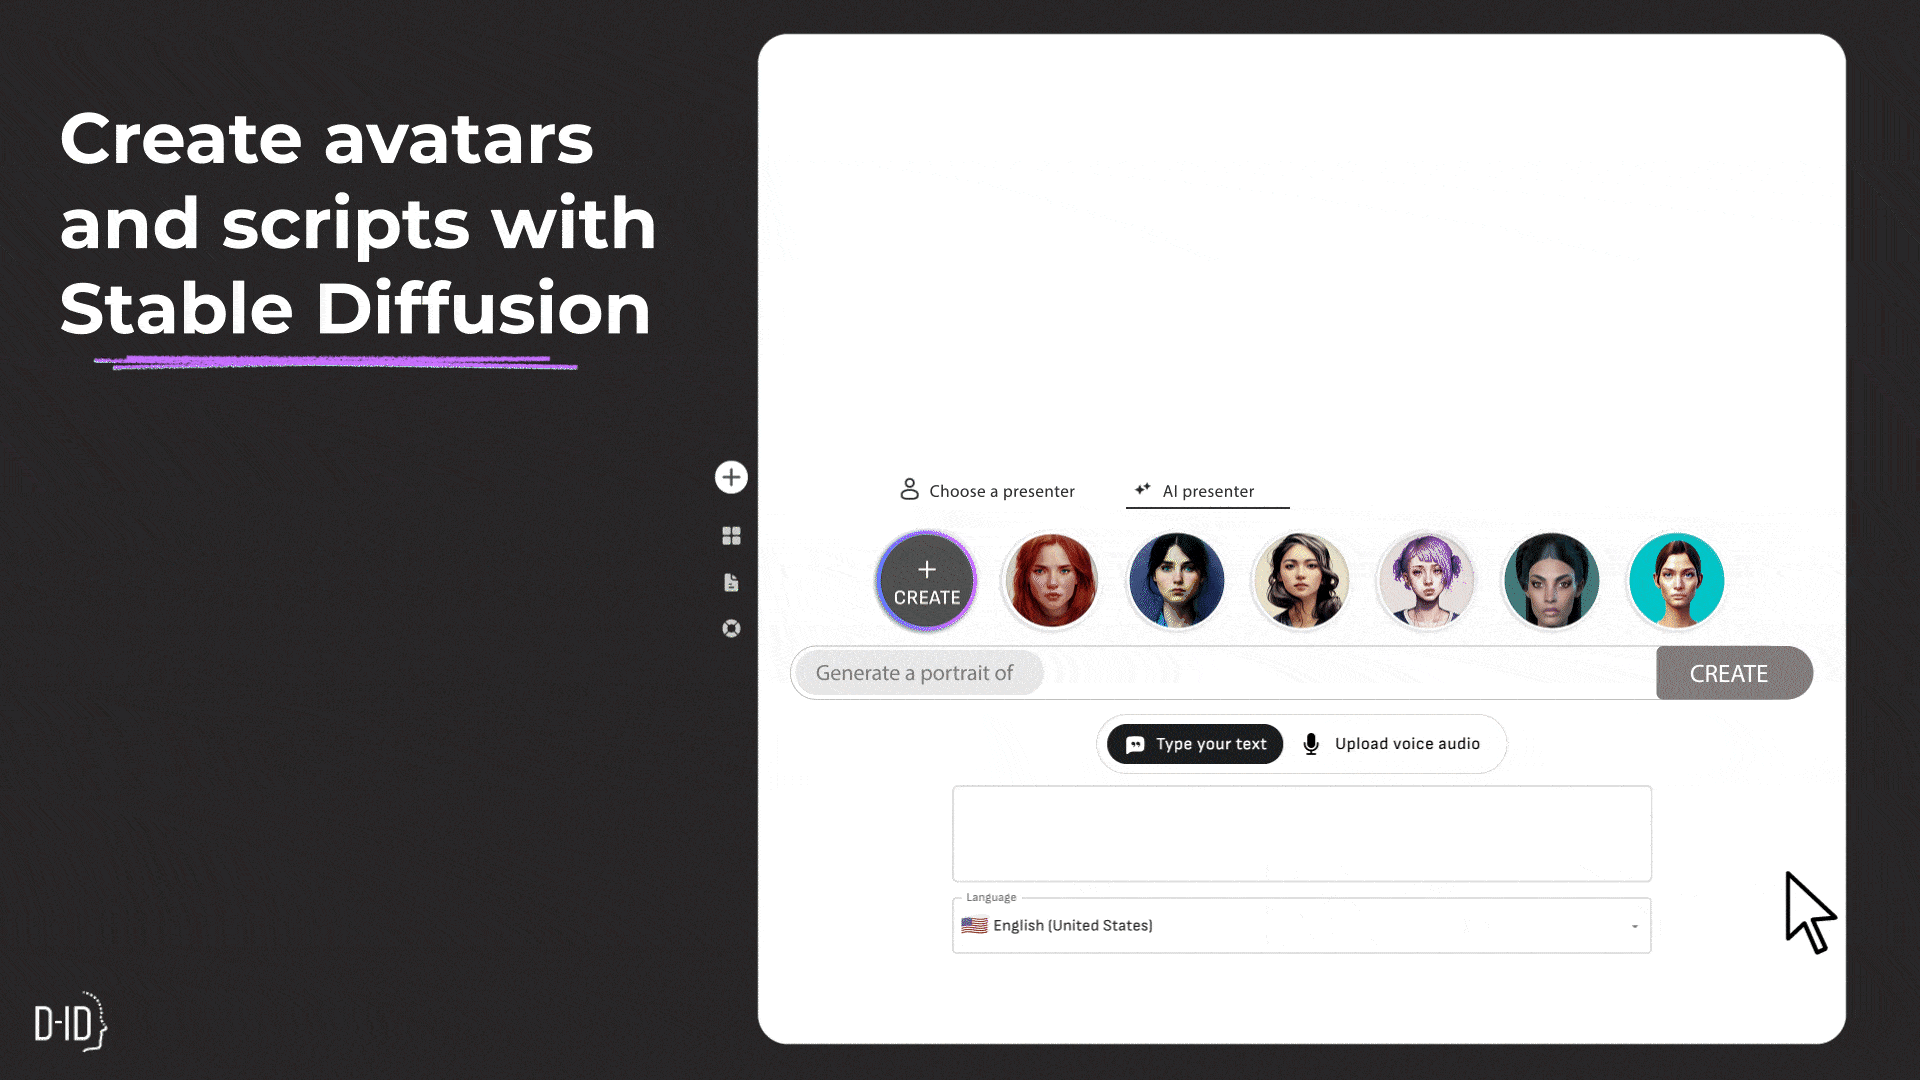 Create new avatars with stable diffusion